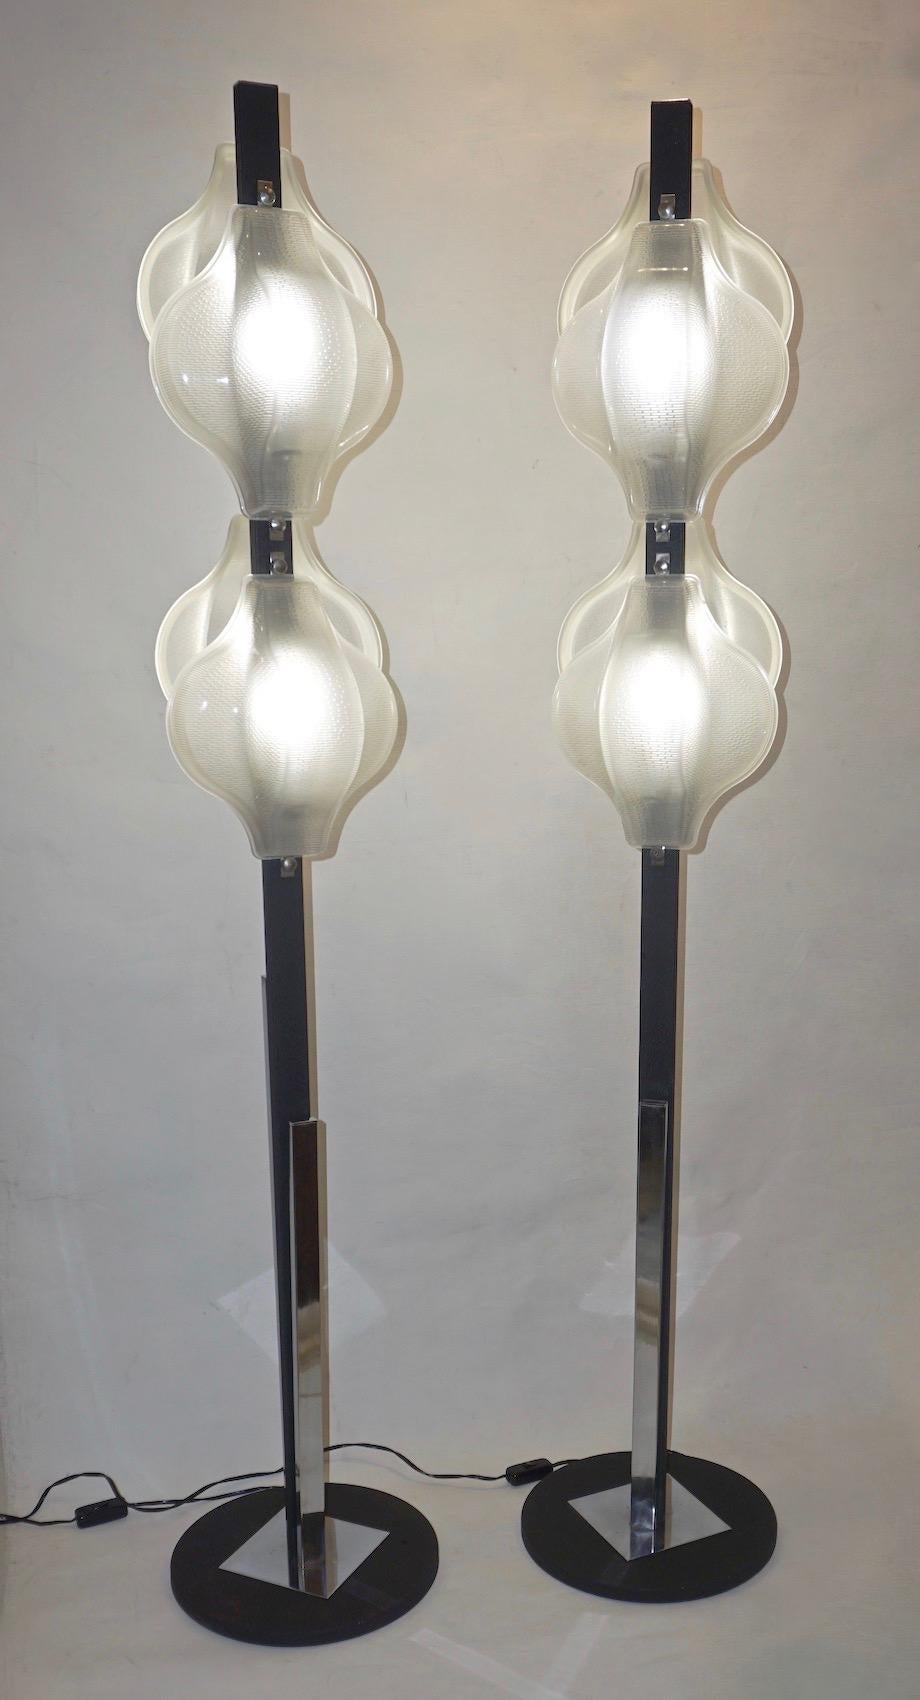 1960s Italian Pair of Minimalist White and Black Organic Chrome Floor Lamps For Sale 7